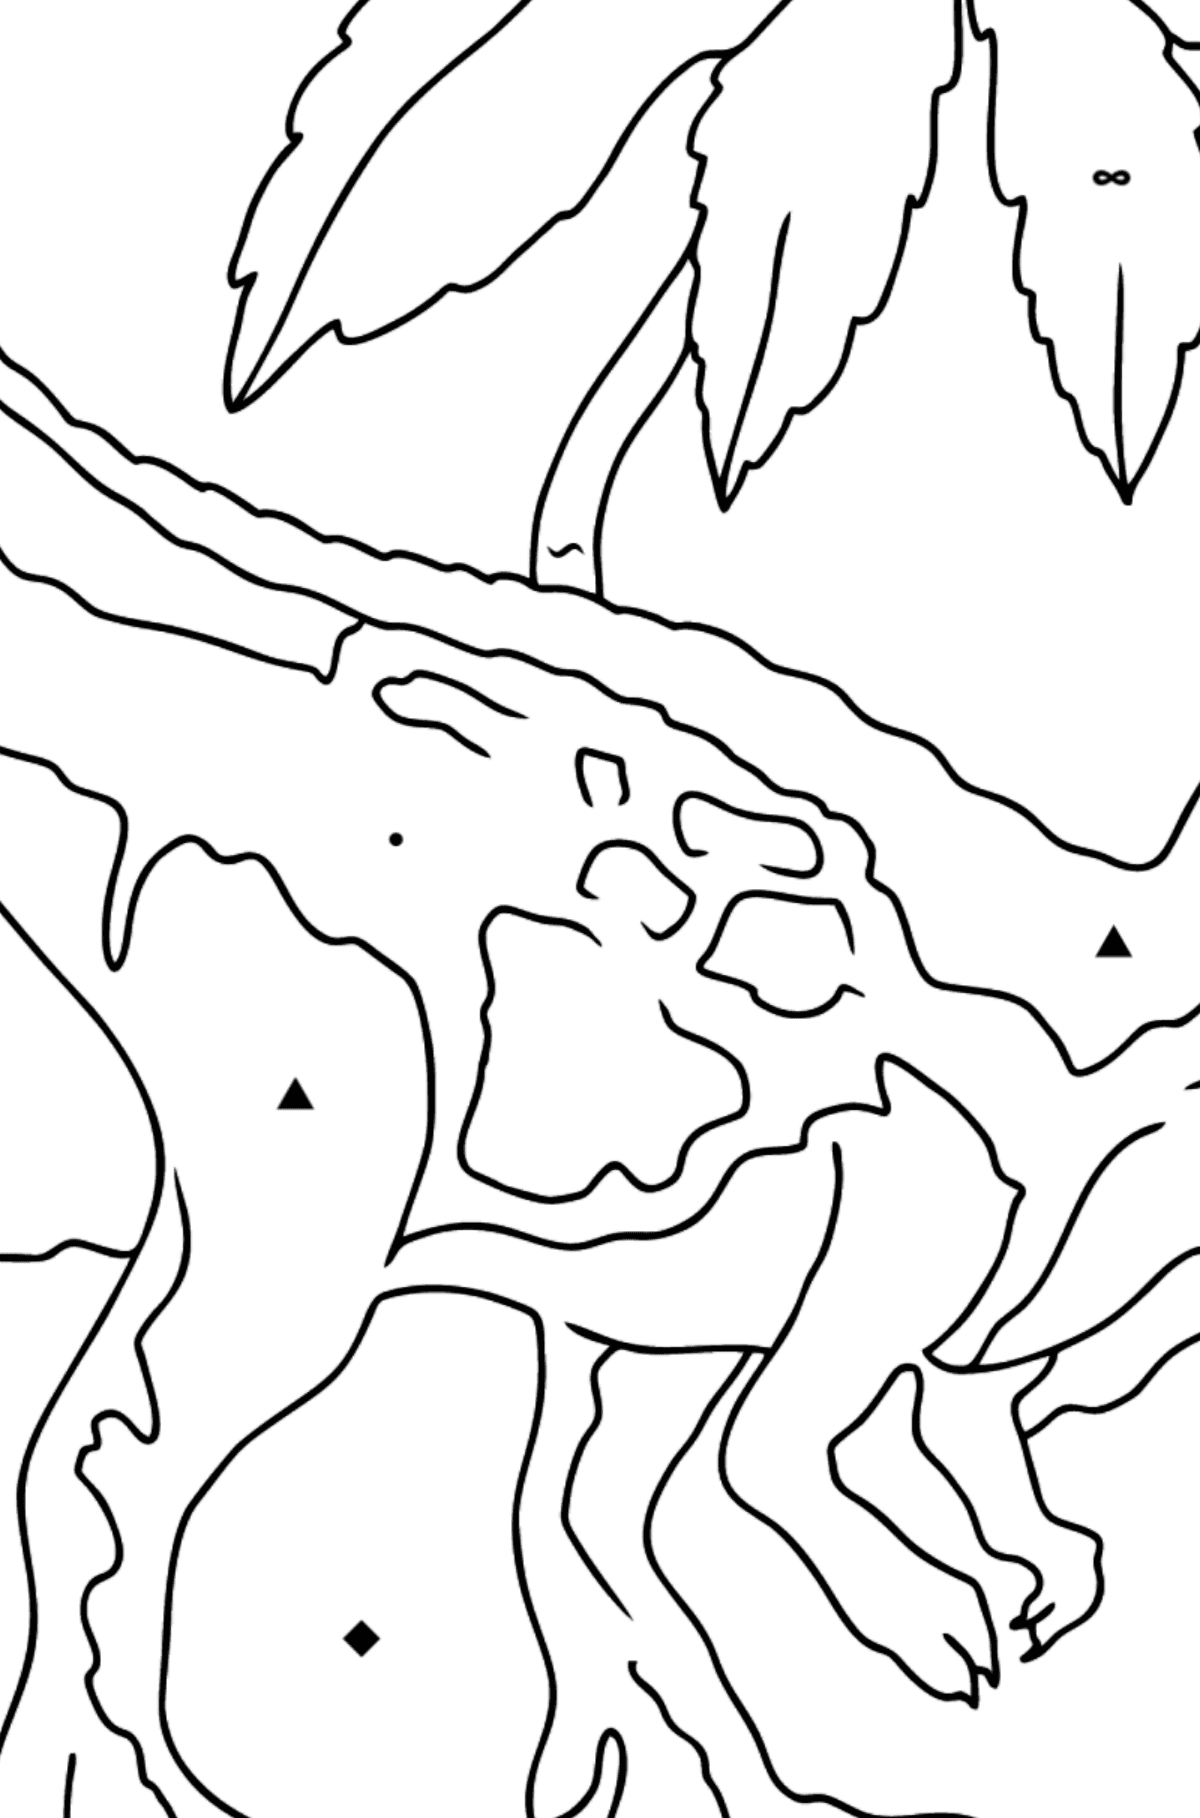 Coloring Page - Tyrannosaurus - The Best Hunter Among Dinosaurs - Coloring by Symbols for Kids